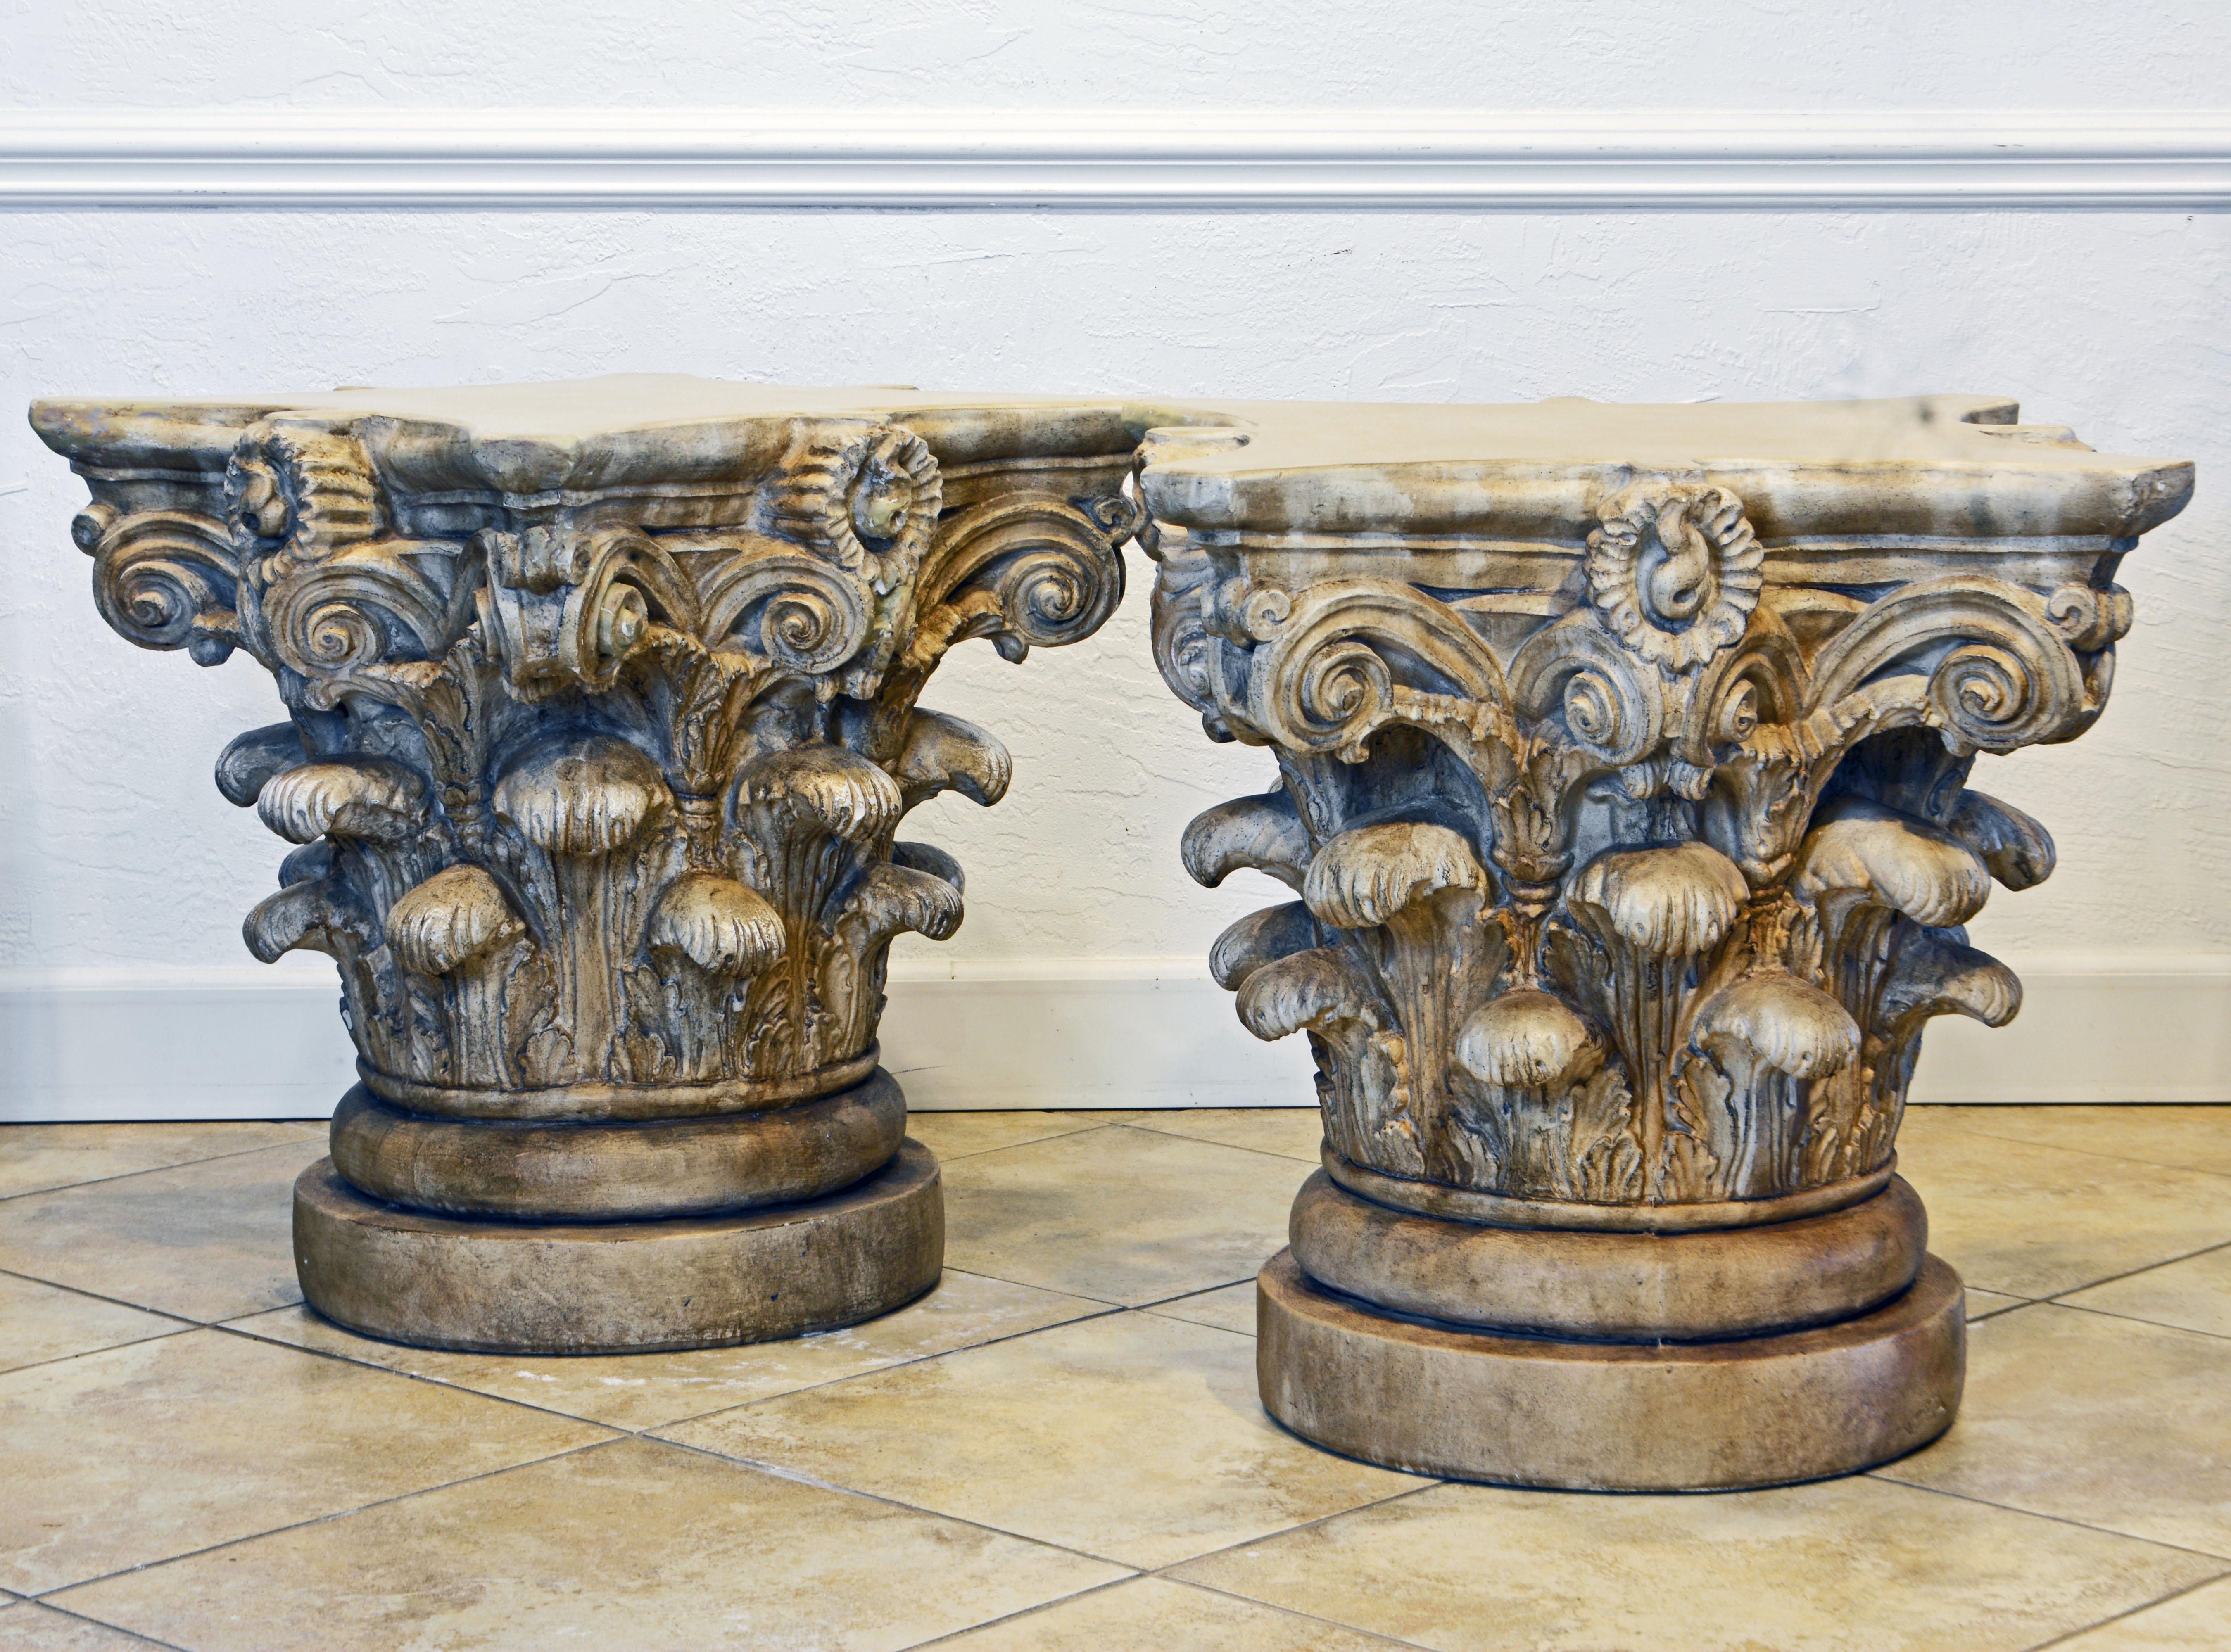 Neoclassical Pair of Corinthian Plaster Capitals after The Antique, Table Bases or Sculptures